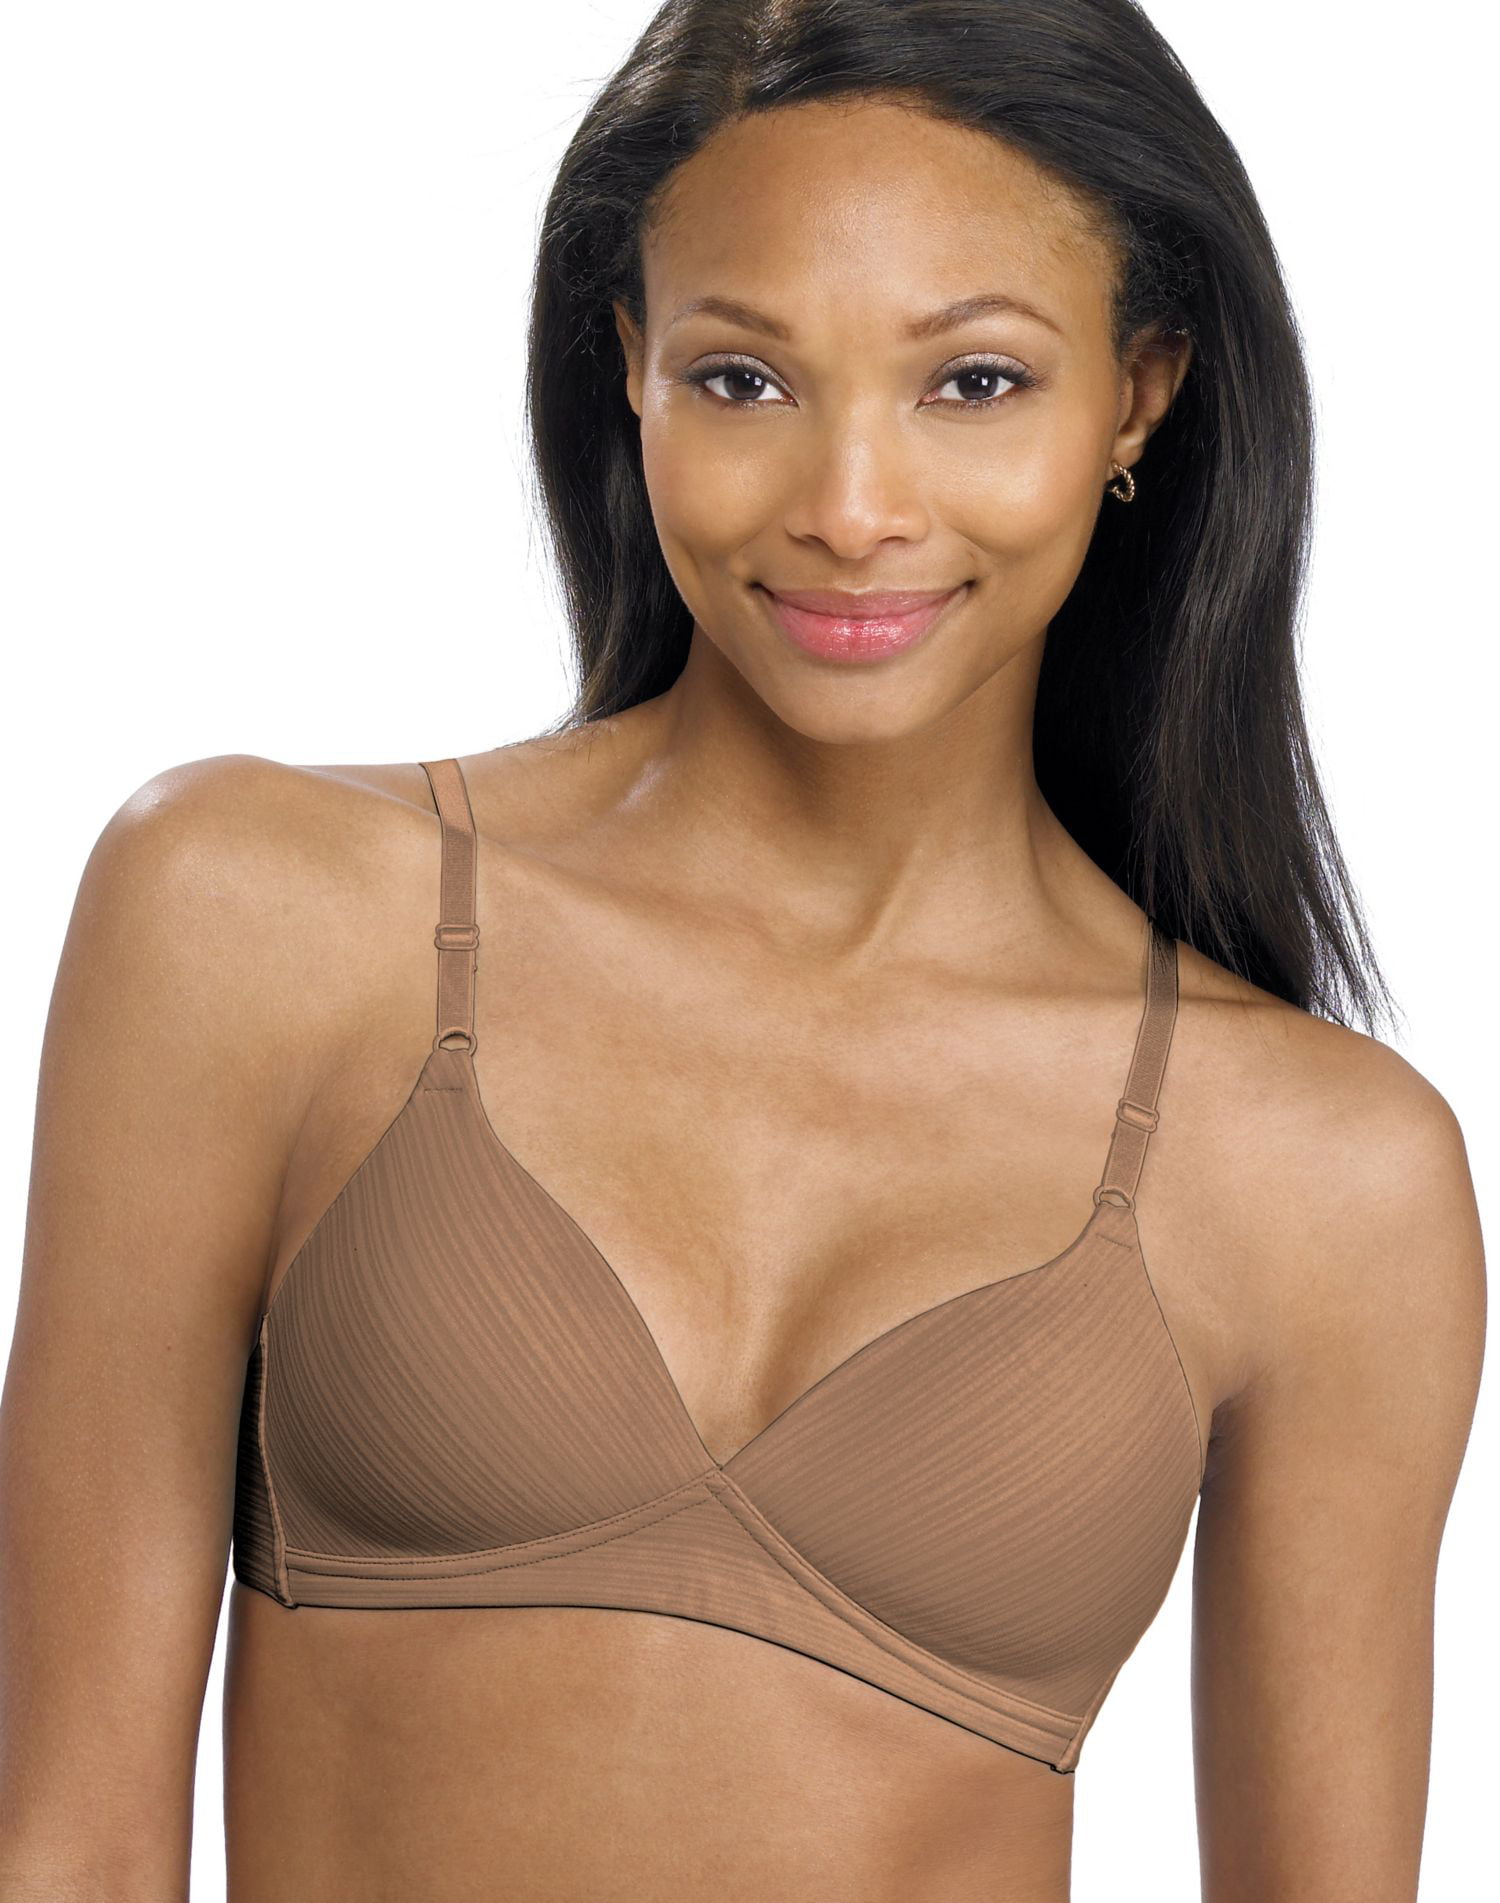 Barely There Concealers Women`s Wirefree Bra - Best-Seller, 38D